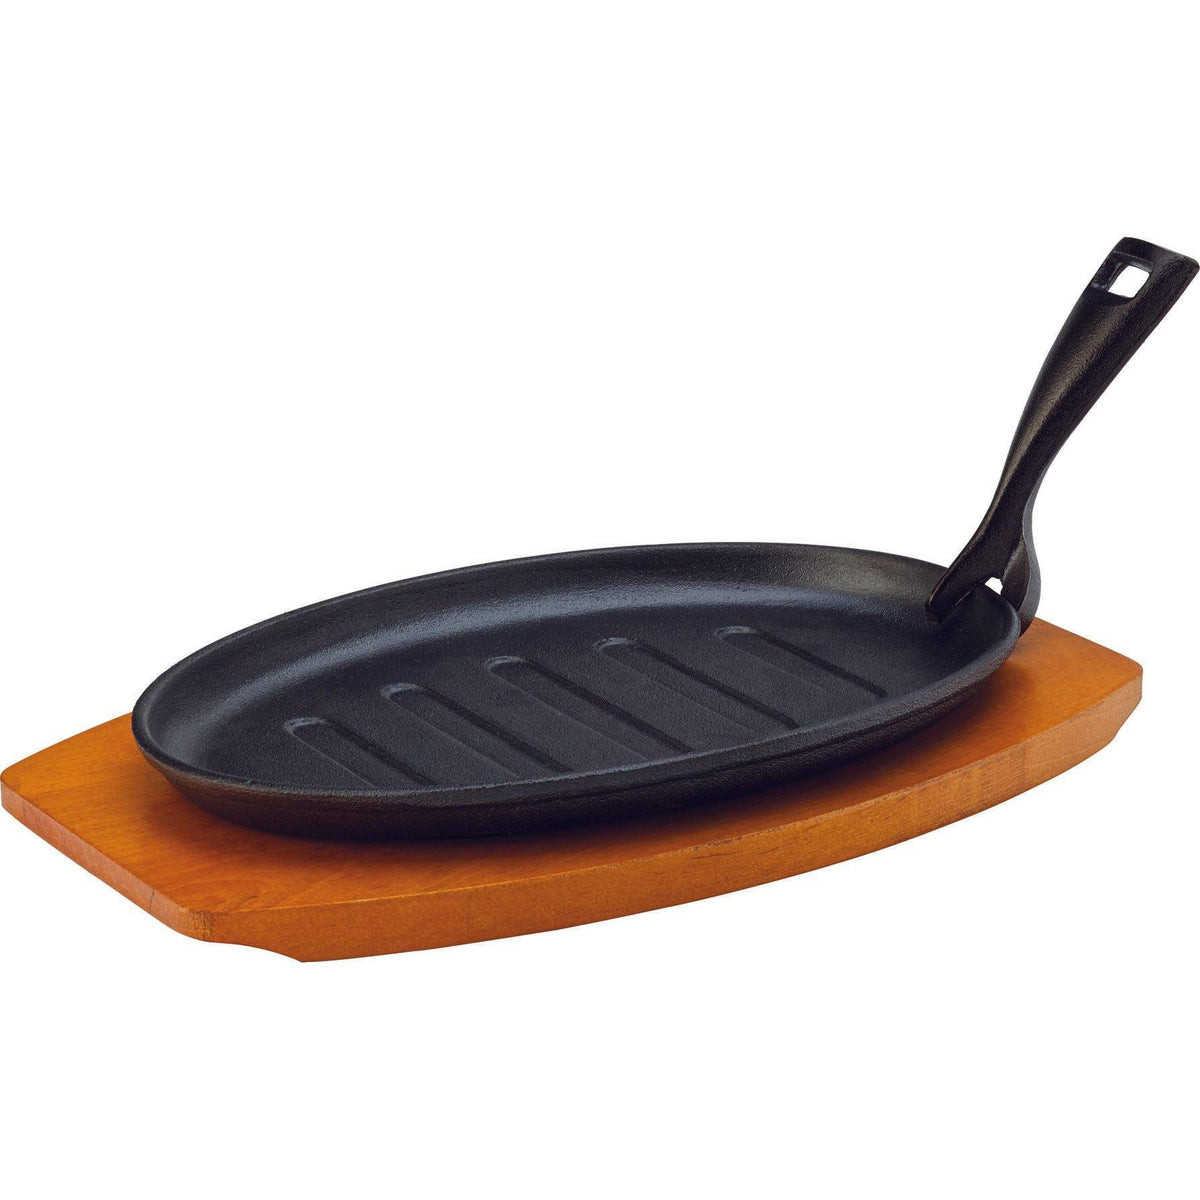 Sizzle Platters with Wooden Base - BESPOKE77